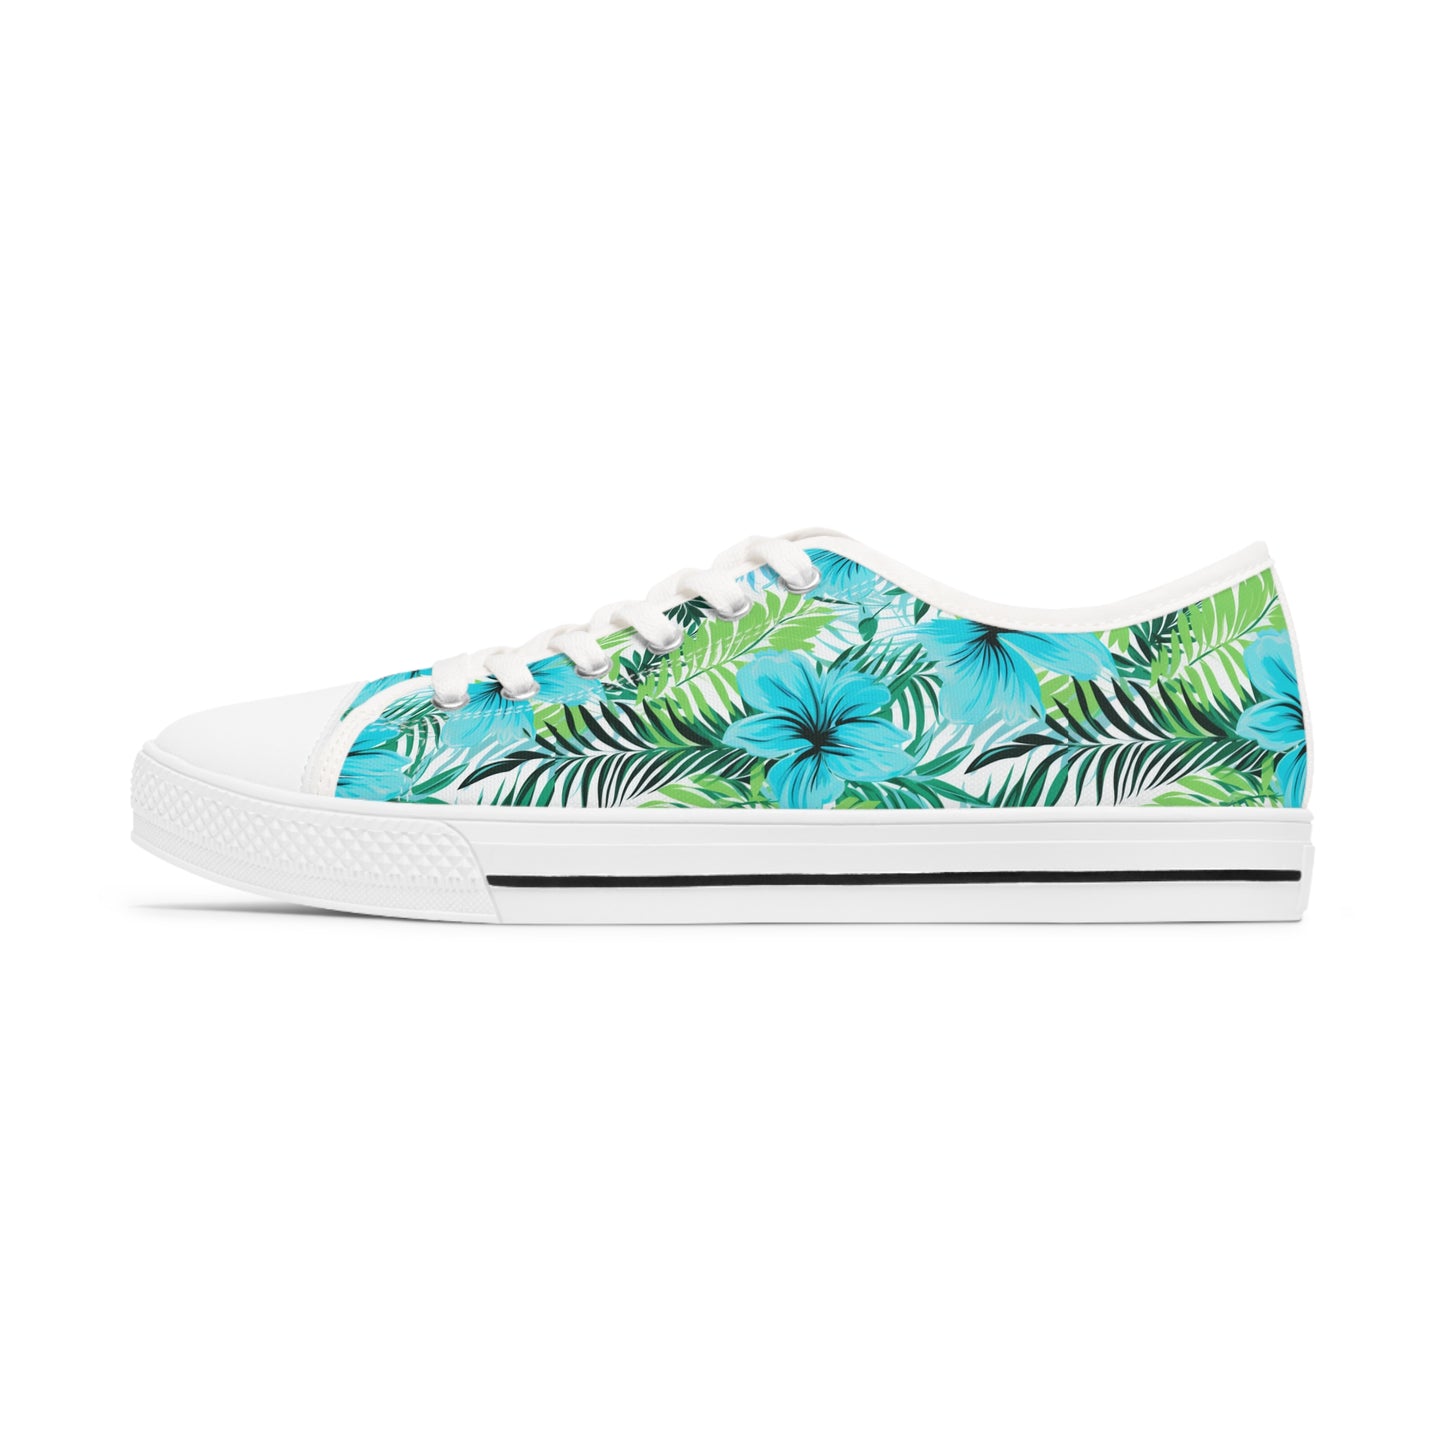 Surface Beach Volleyball Club Neon Palm Women's Low Top Sneakers